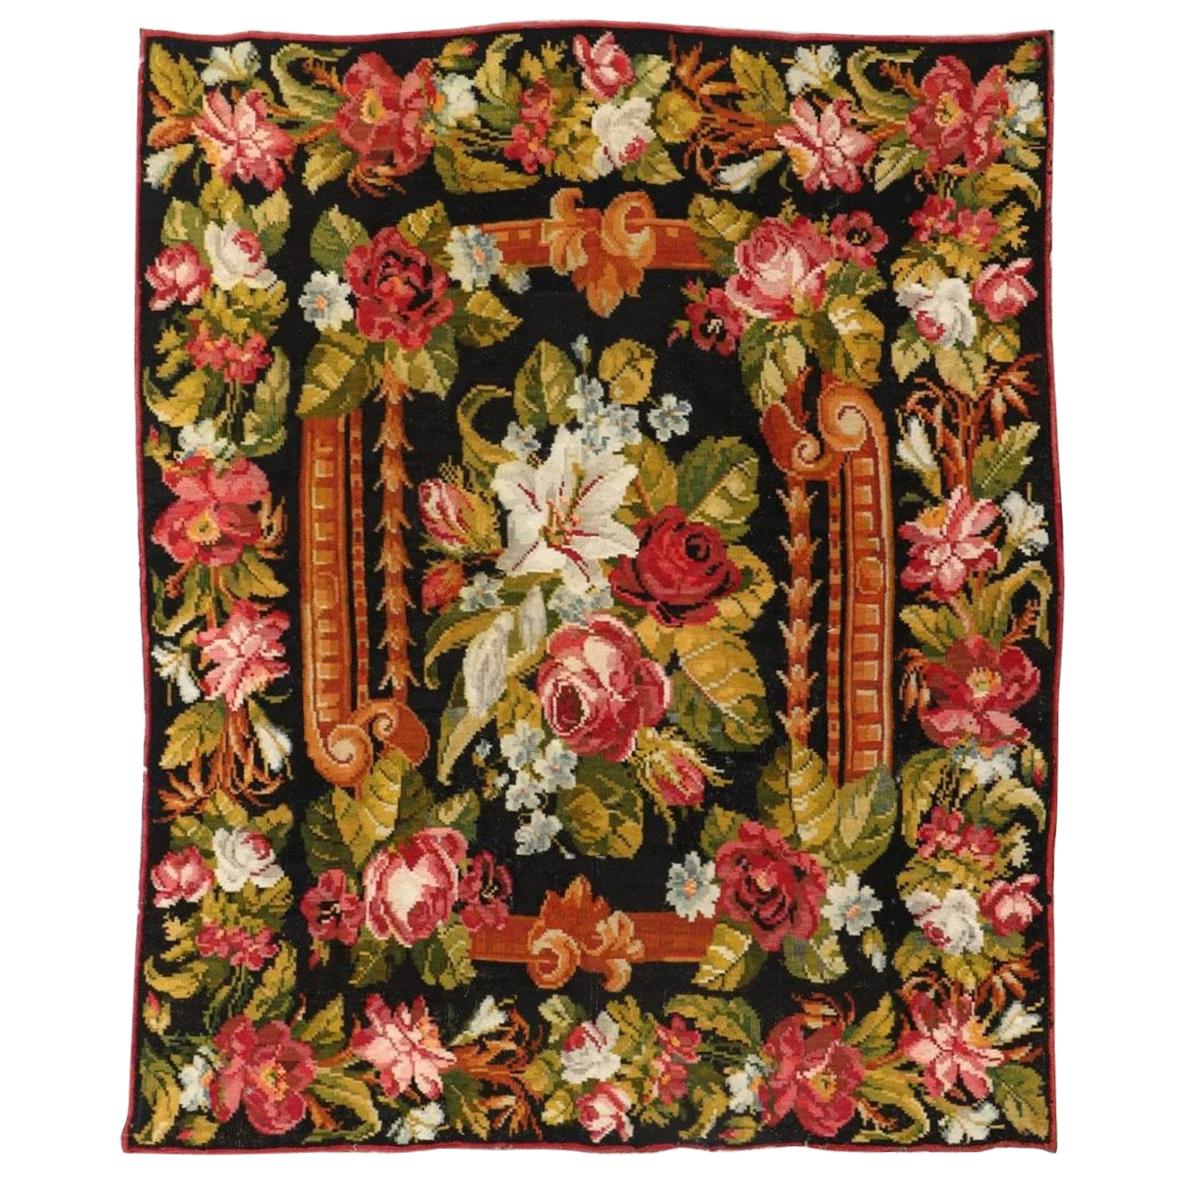 Antique Floral Aubusson Tapestry Style Bessarabian Kilim Flatweave Rug, c. 1900